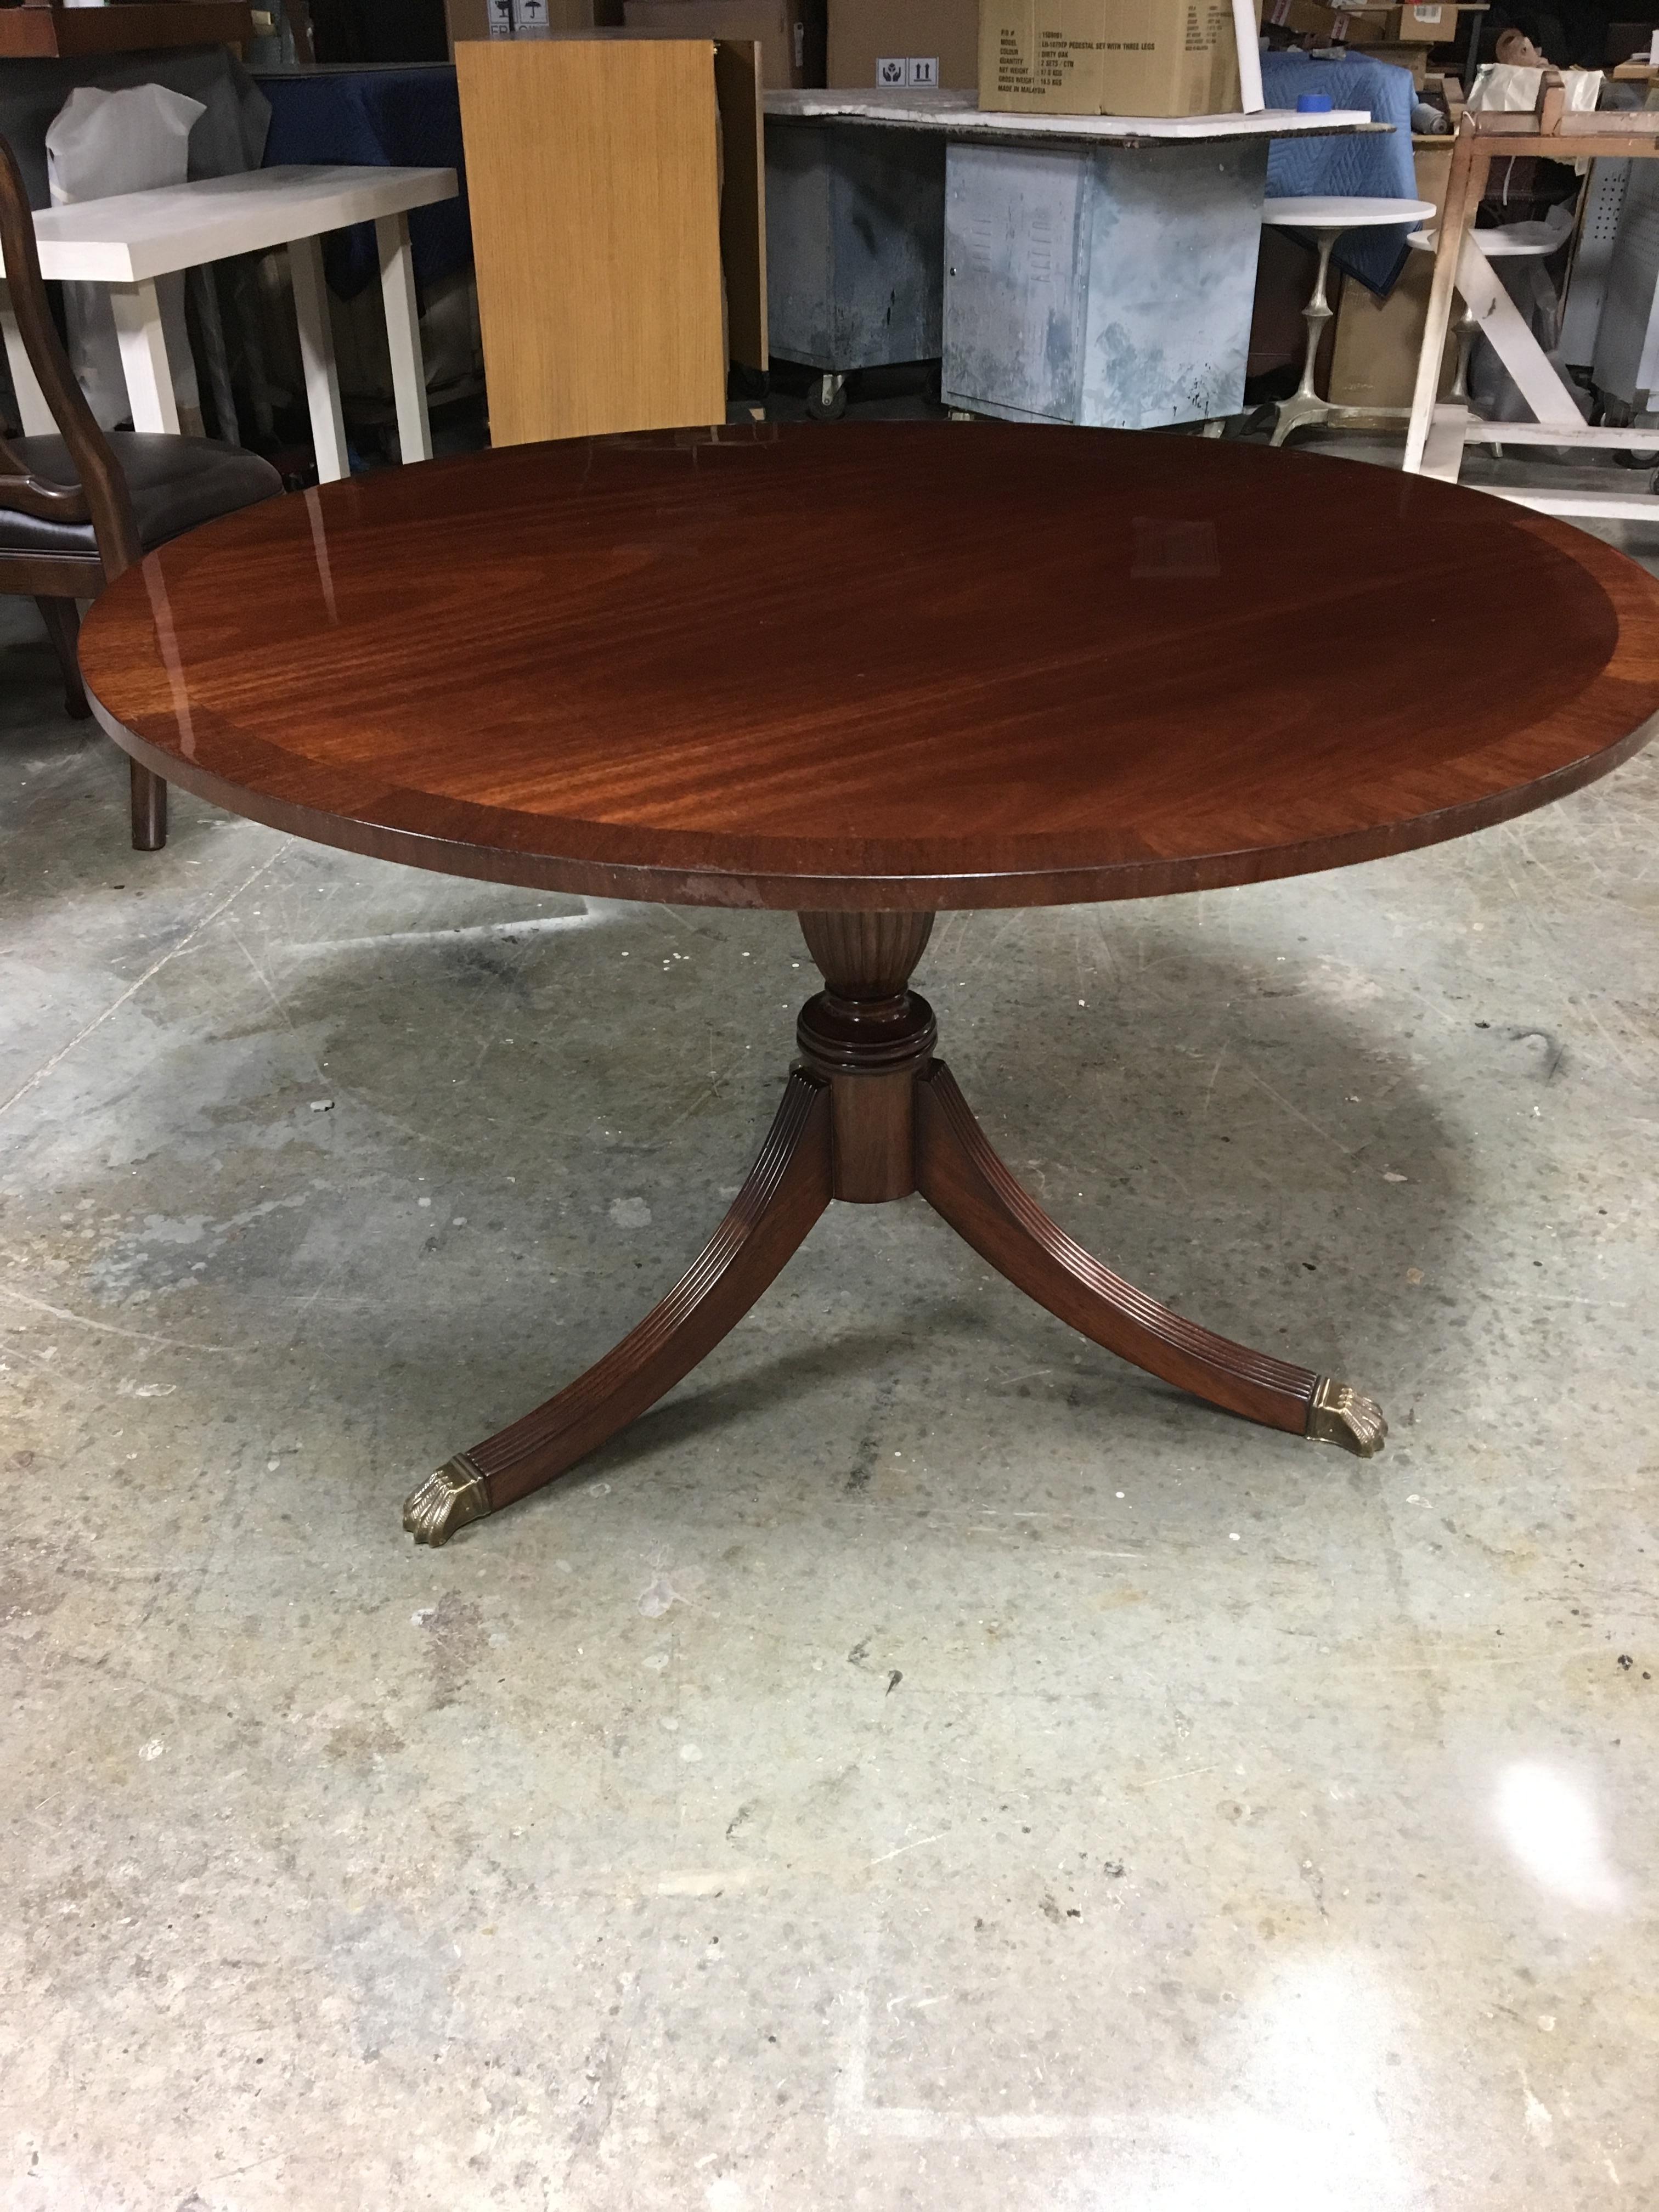 This is made-to-order round traditional mahogany accent/foyer table made in the Leighton Hall shop. It features a field of cathedral mahogany and a border of straight grain mahogany. It has a hand rubbed and polished semigloss finish. The pedestal